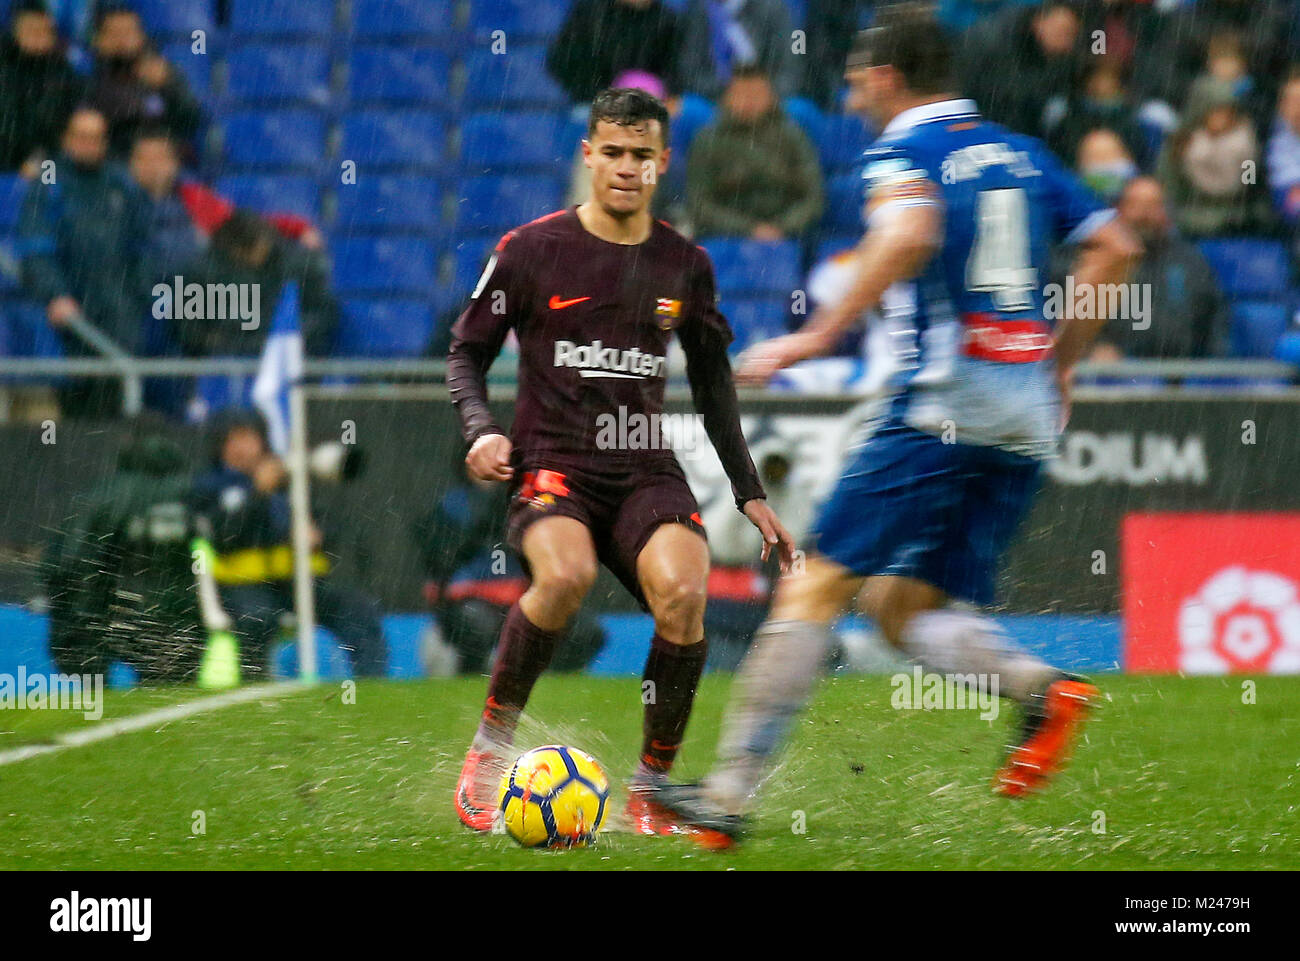 Barcelona, Spain. 01st Feb, 2018. Philippe Coutinho and Victor Sanchez during the match between RCD Espanyol vs FC Barcelona, for the round 22 of the Liga Santander, played at Cornella -El Prat Stadium on 3th February 2018 in Barcelona, Spain. Credit: Gtres Información más Comuniación on line, S.L./Alamy Live News Stock Photo